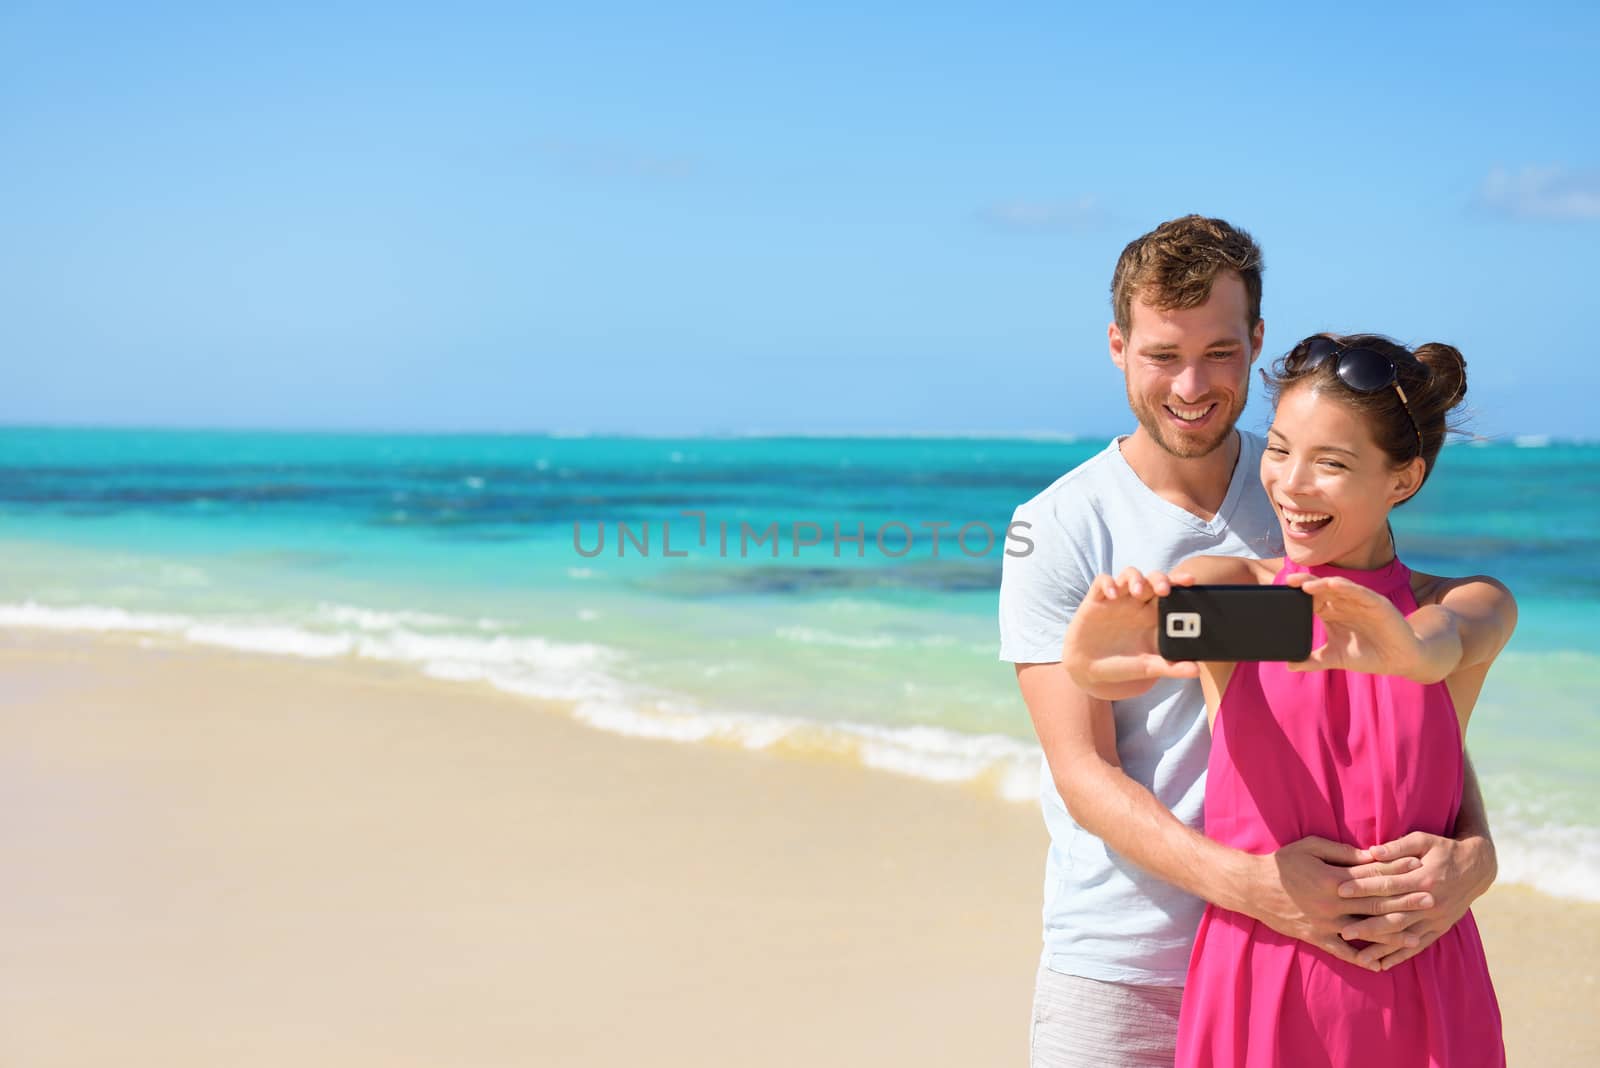 Couple Taking Selfie On Mobile Phone At Beach by Maridav